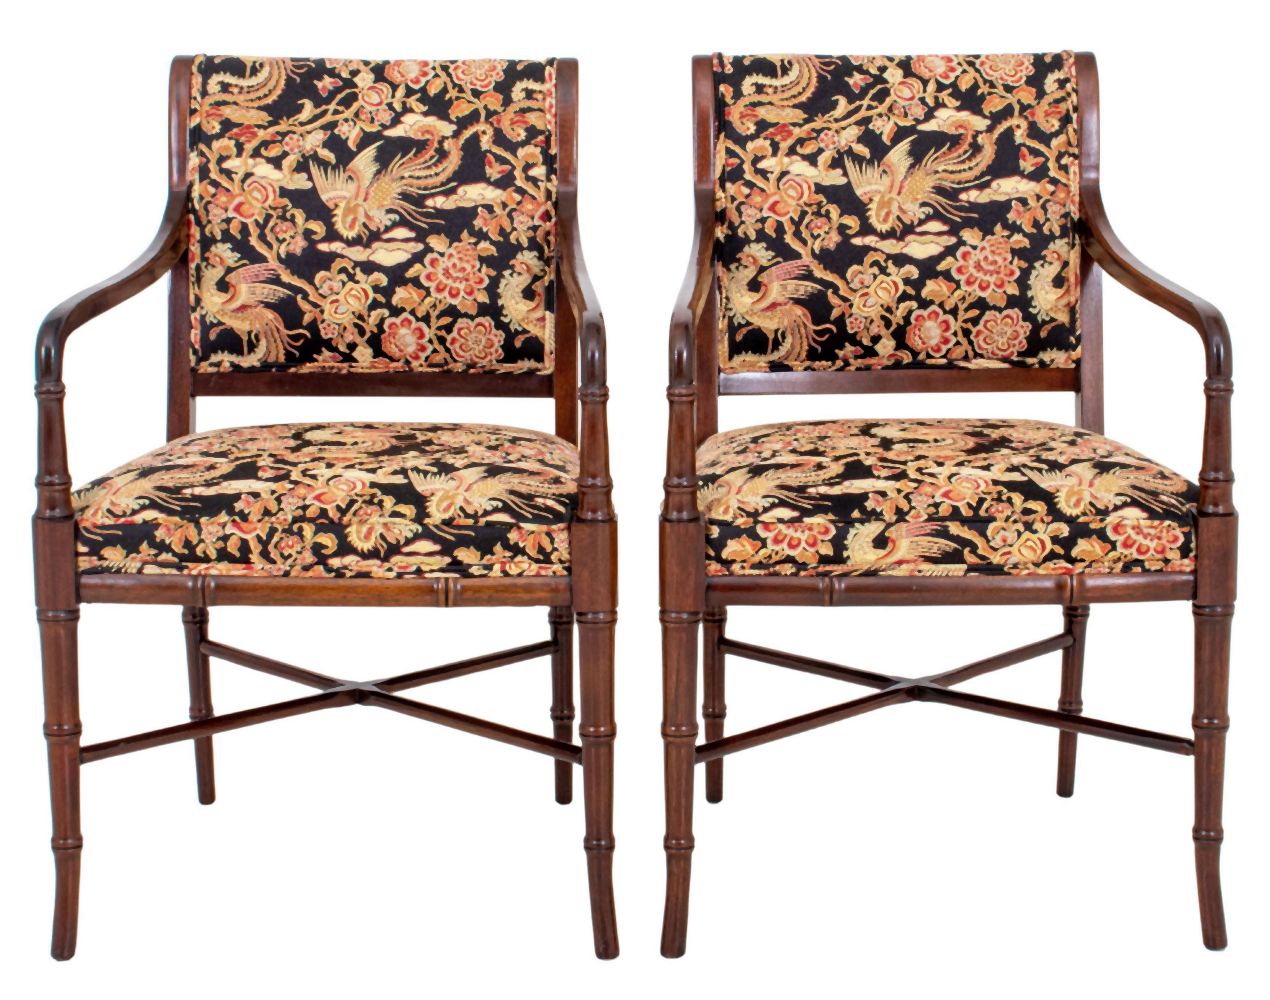 REGENCY STYLE FAUX BAMBOO ARM CHAIRS,